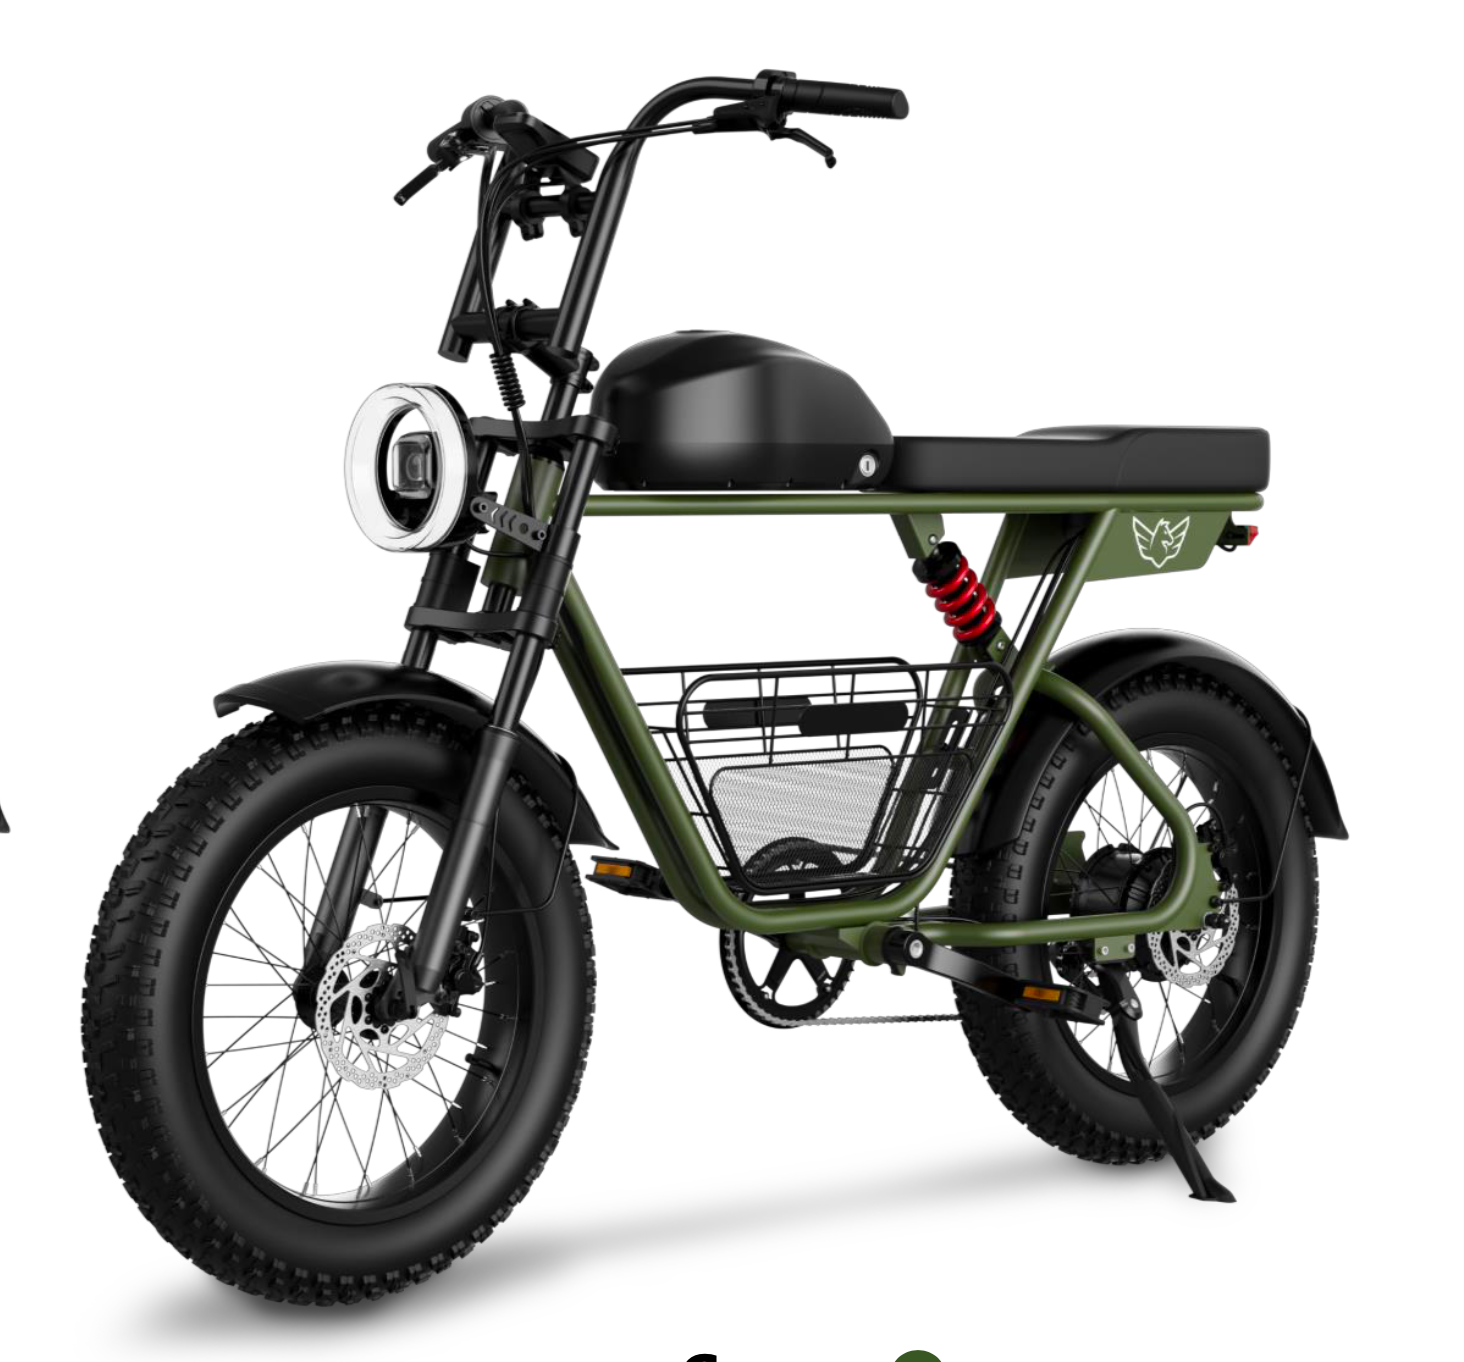 Windhorse D5 - 1000W Fat Tire Cafe Racer Style Electric Bike